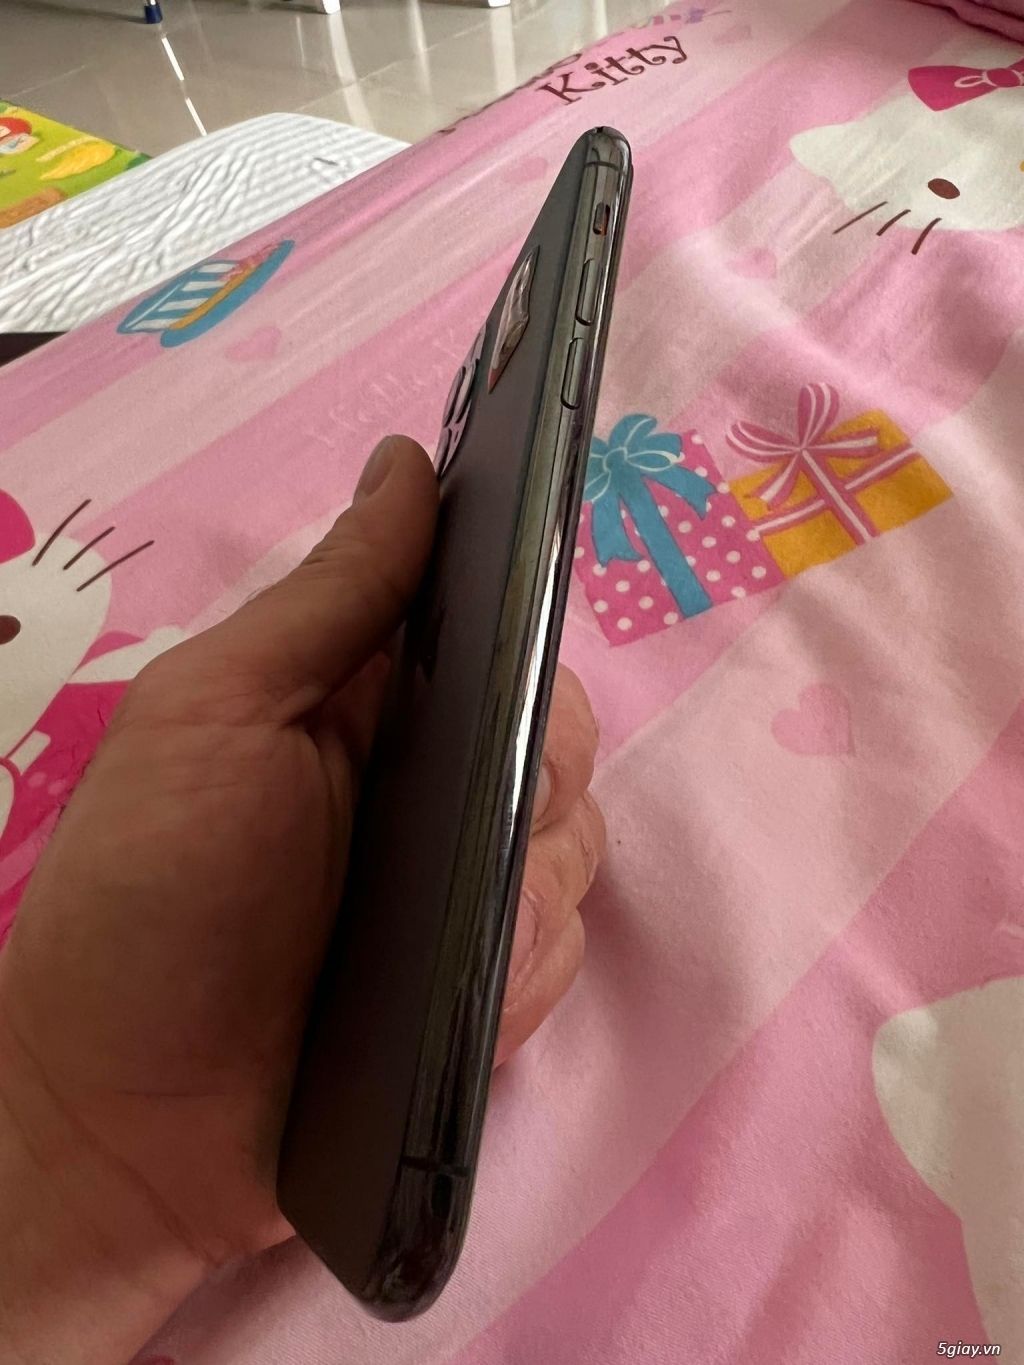 BÁN IPHONE 11 PRO MAX 256GB MỸ USED - 5